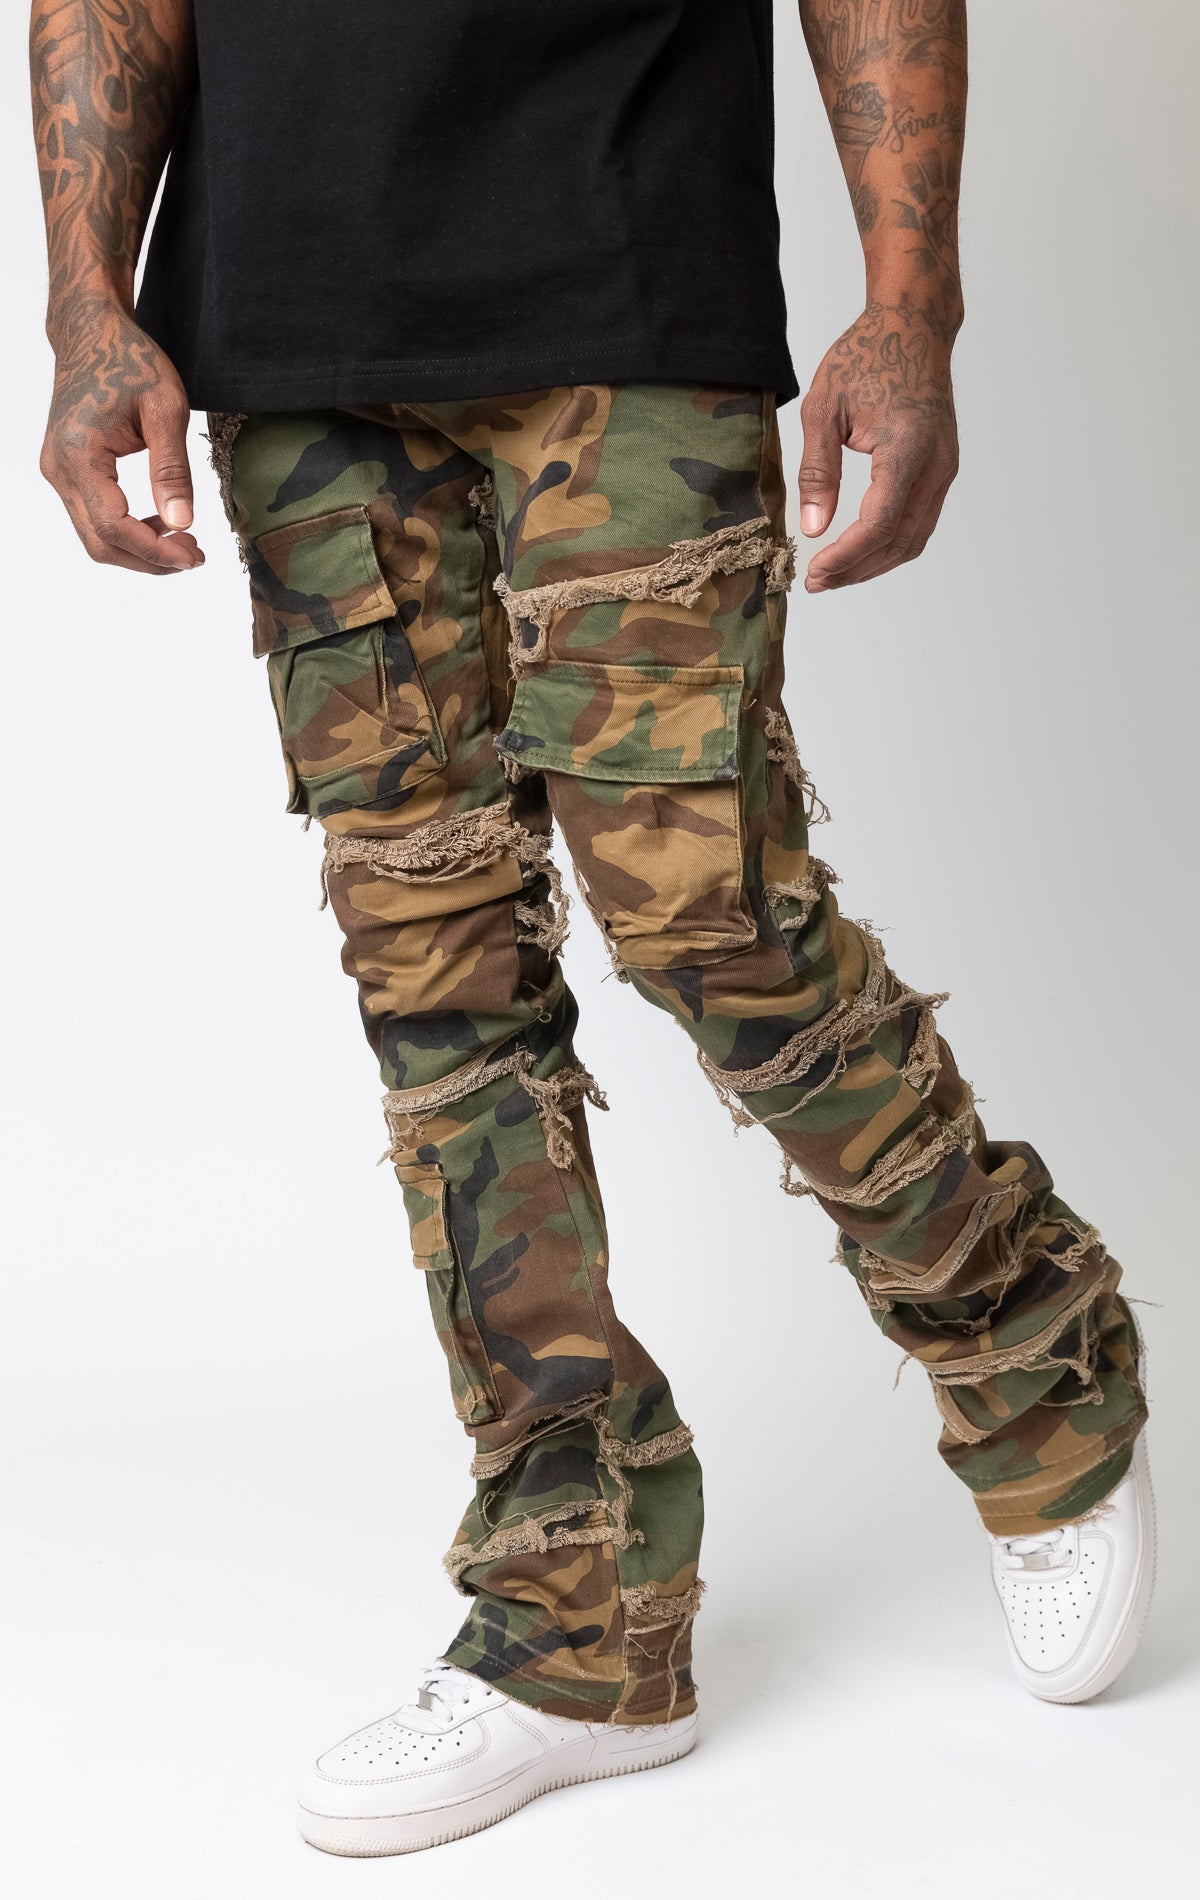 Camo pants with premium stretch, 2% spandex, and premium leather waist label, featuring a button fly